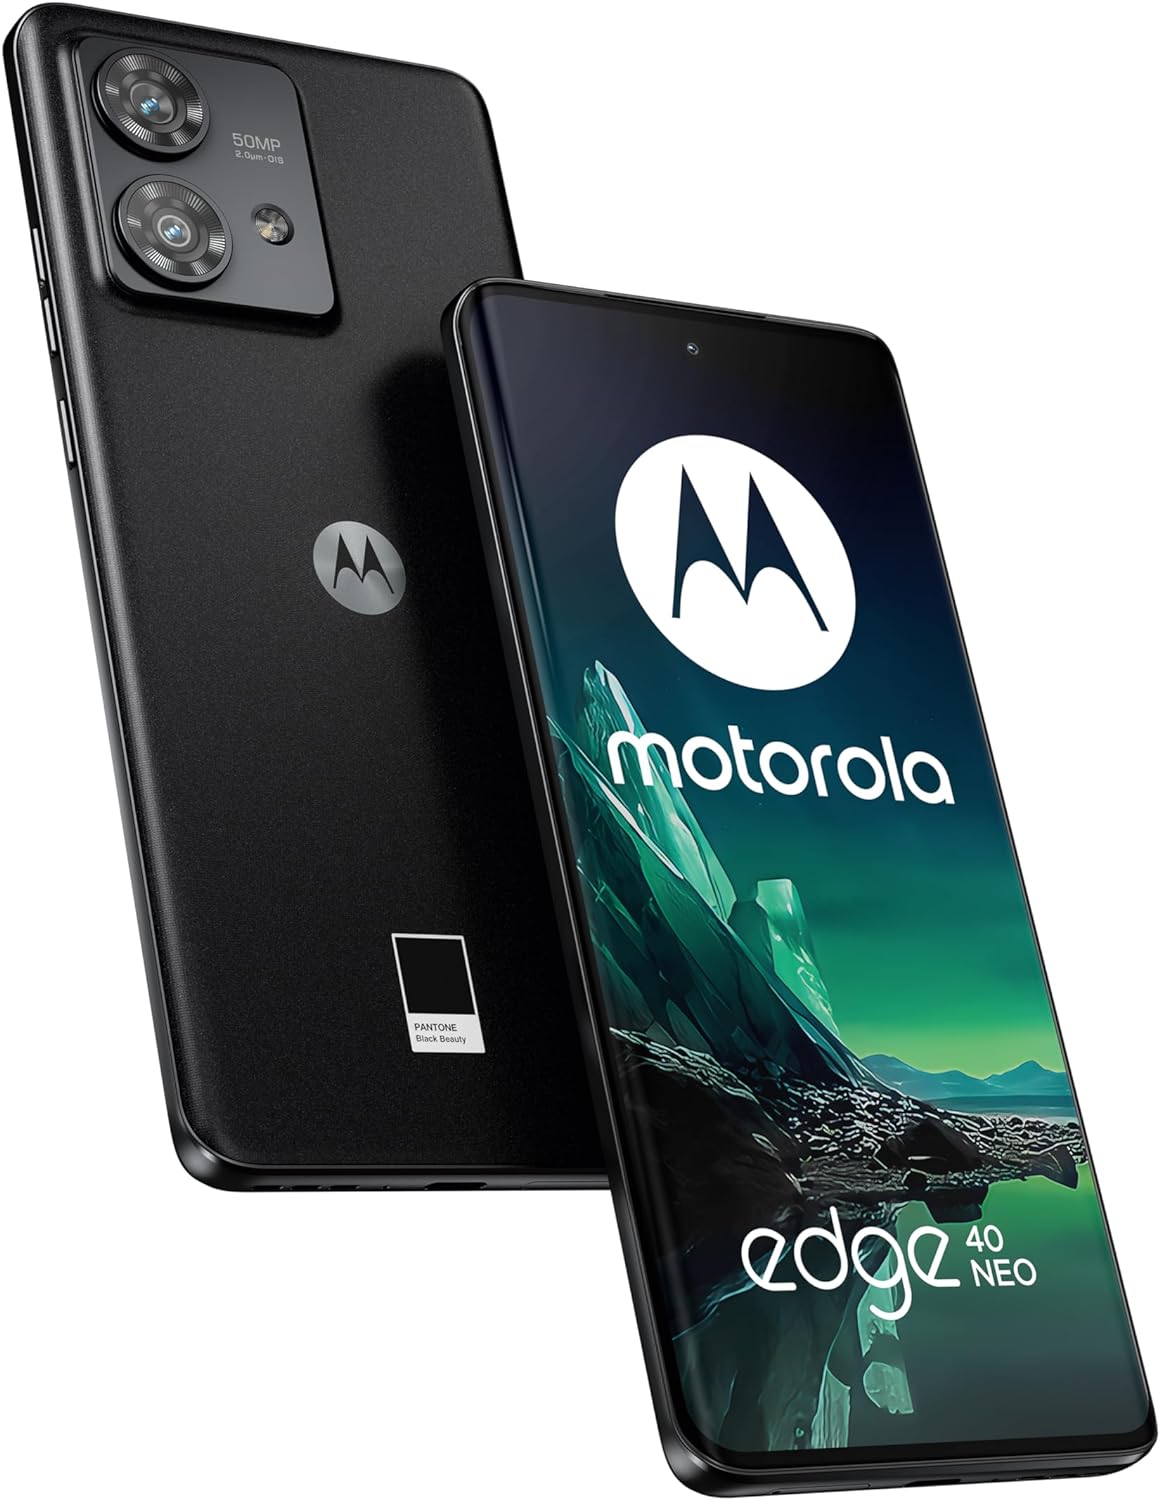 The image shows two views of a Motorola Edge 40 Neo.